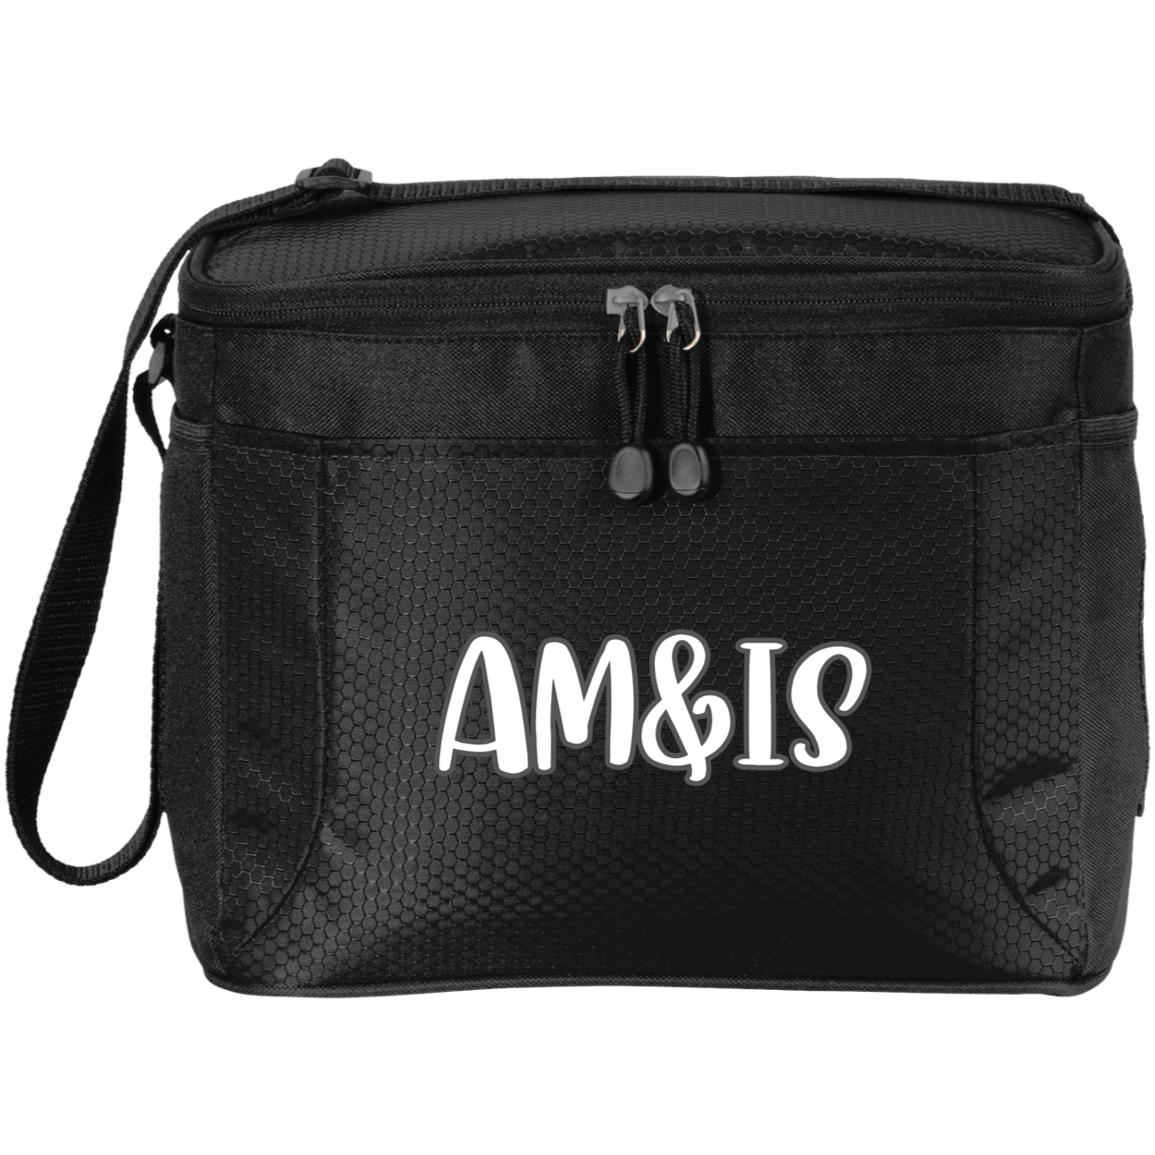 BLACK BLACK ONE SIZE - AM&IS Activewear 12-Pack Cooler - lunch bag at TFC&H Co.